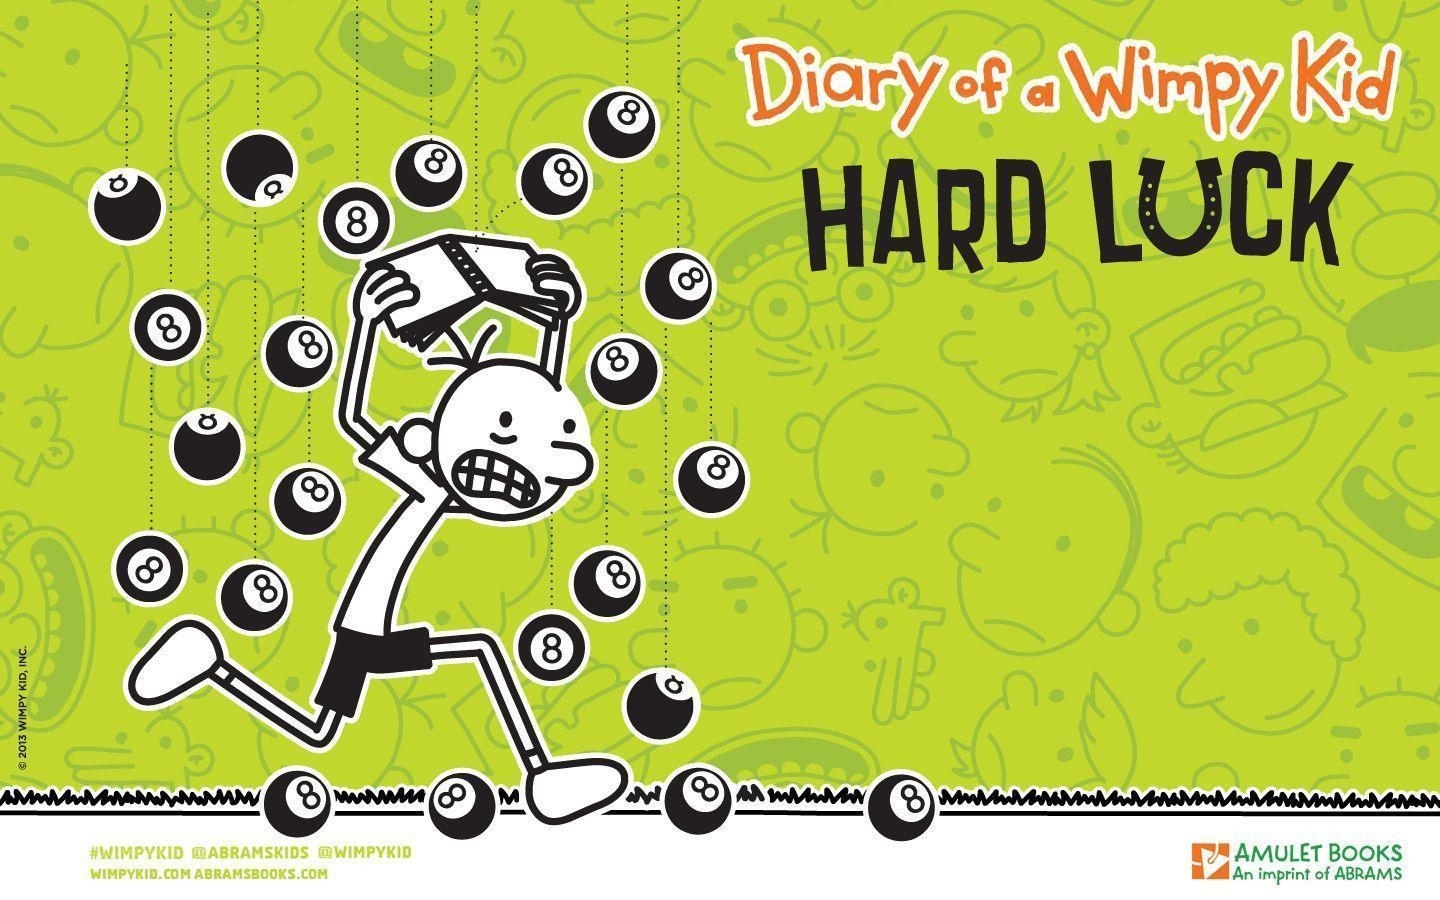 diary of a wimpy kid wallpapers - wallpaper cave